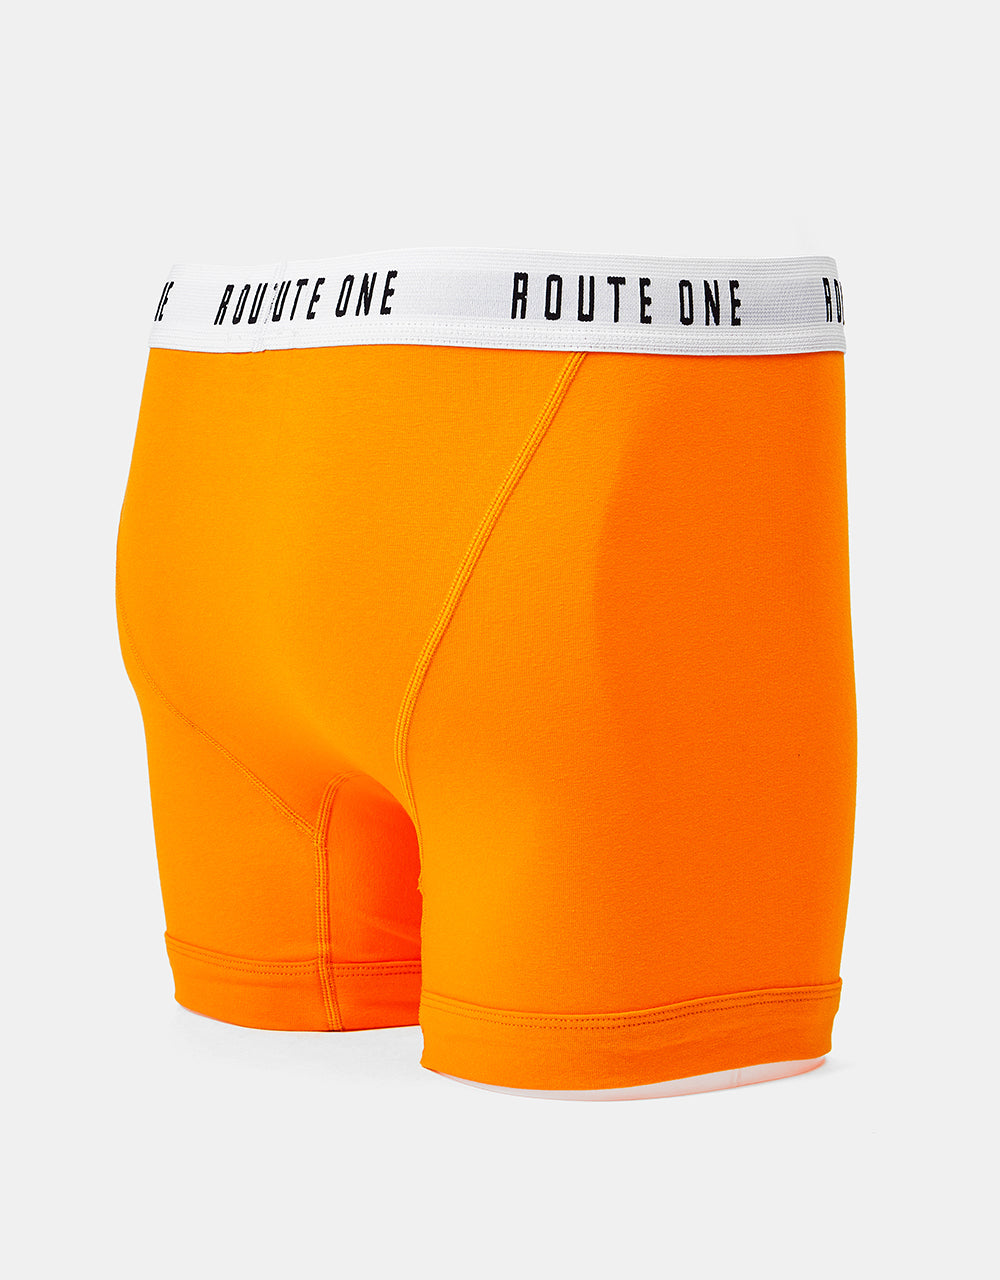 Route One Classic Boxer Shorts 2 Pack - Orange Zest/Classic Navy